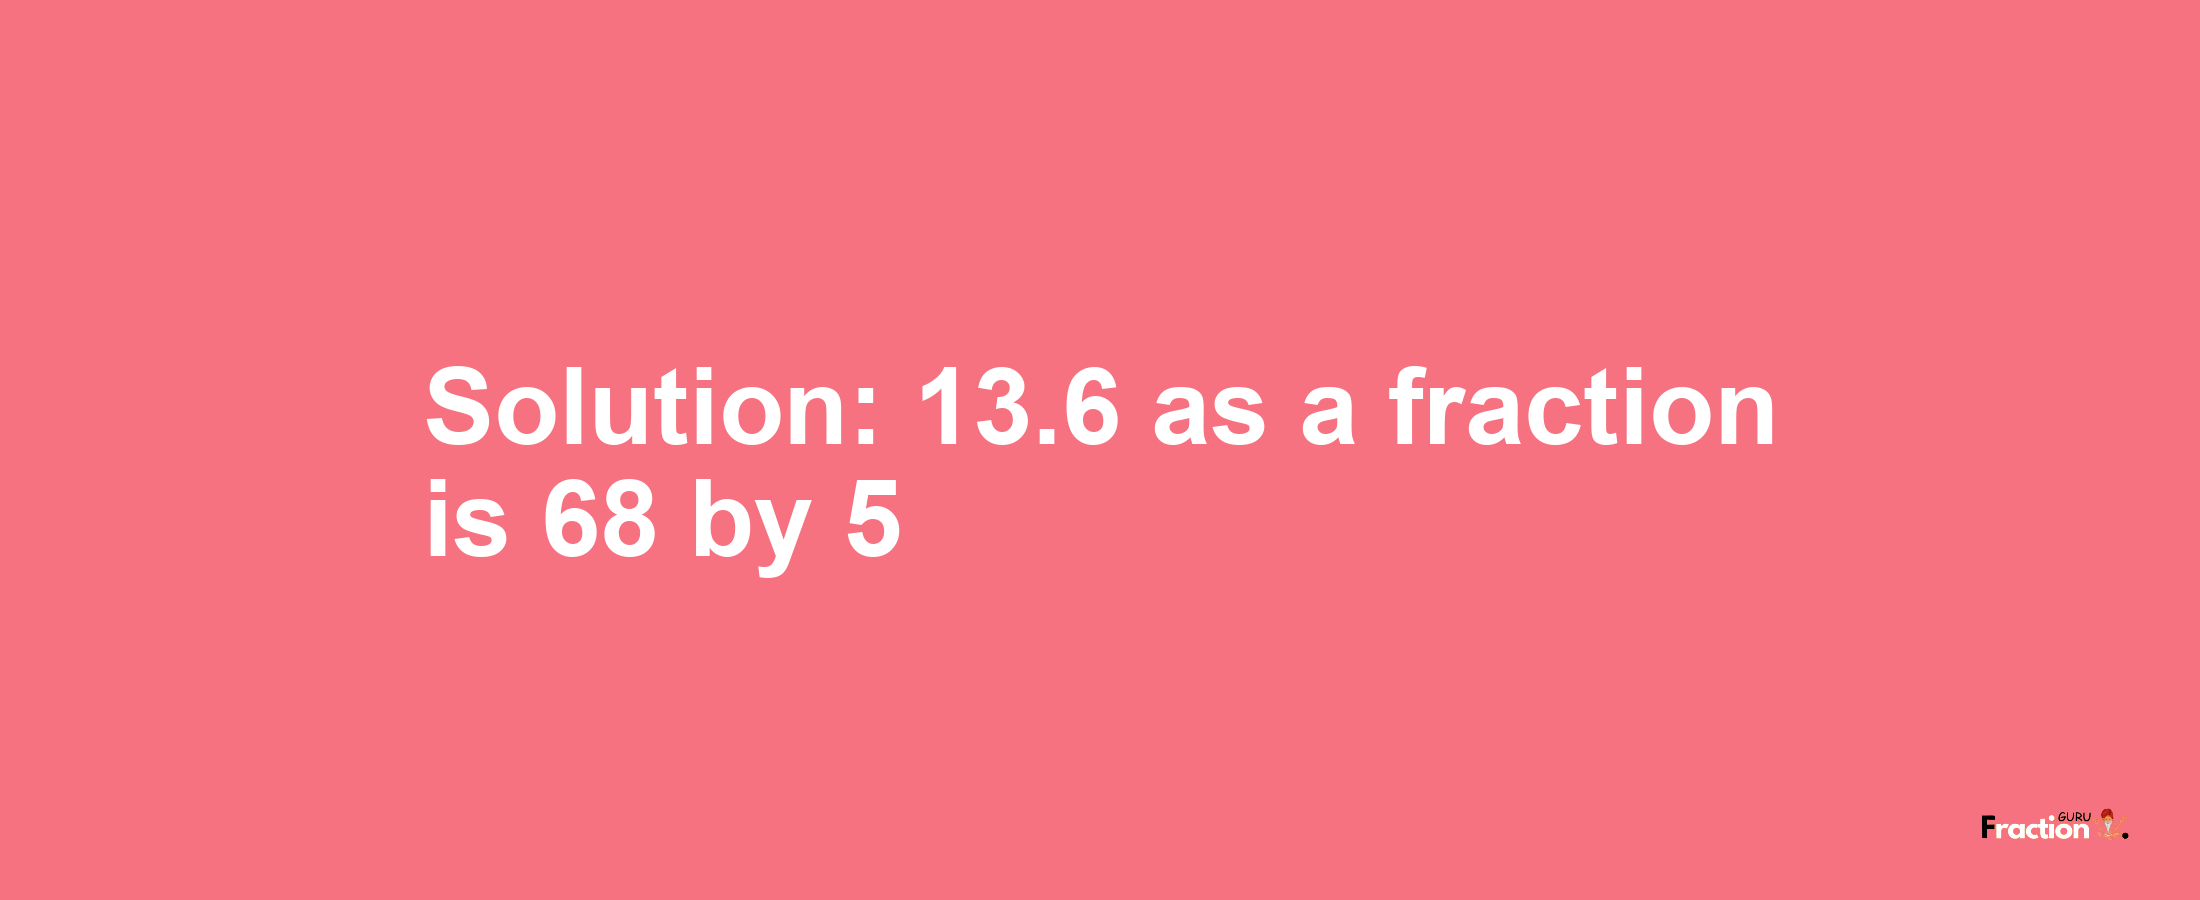 Solution:13.6 as a fraction is 68/5